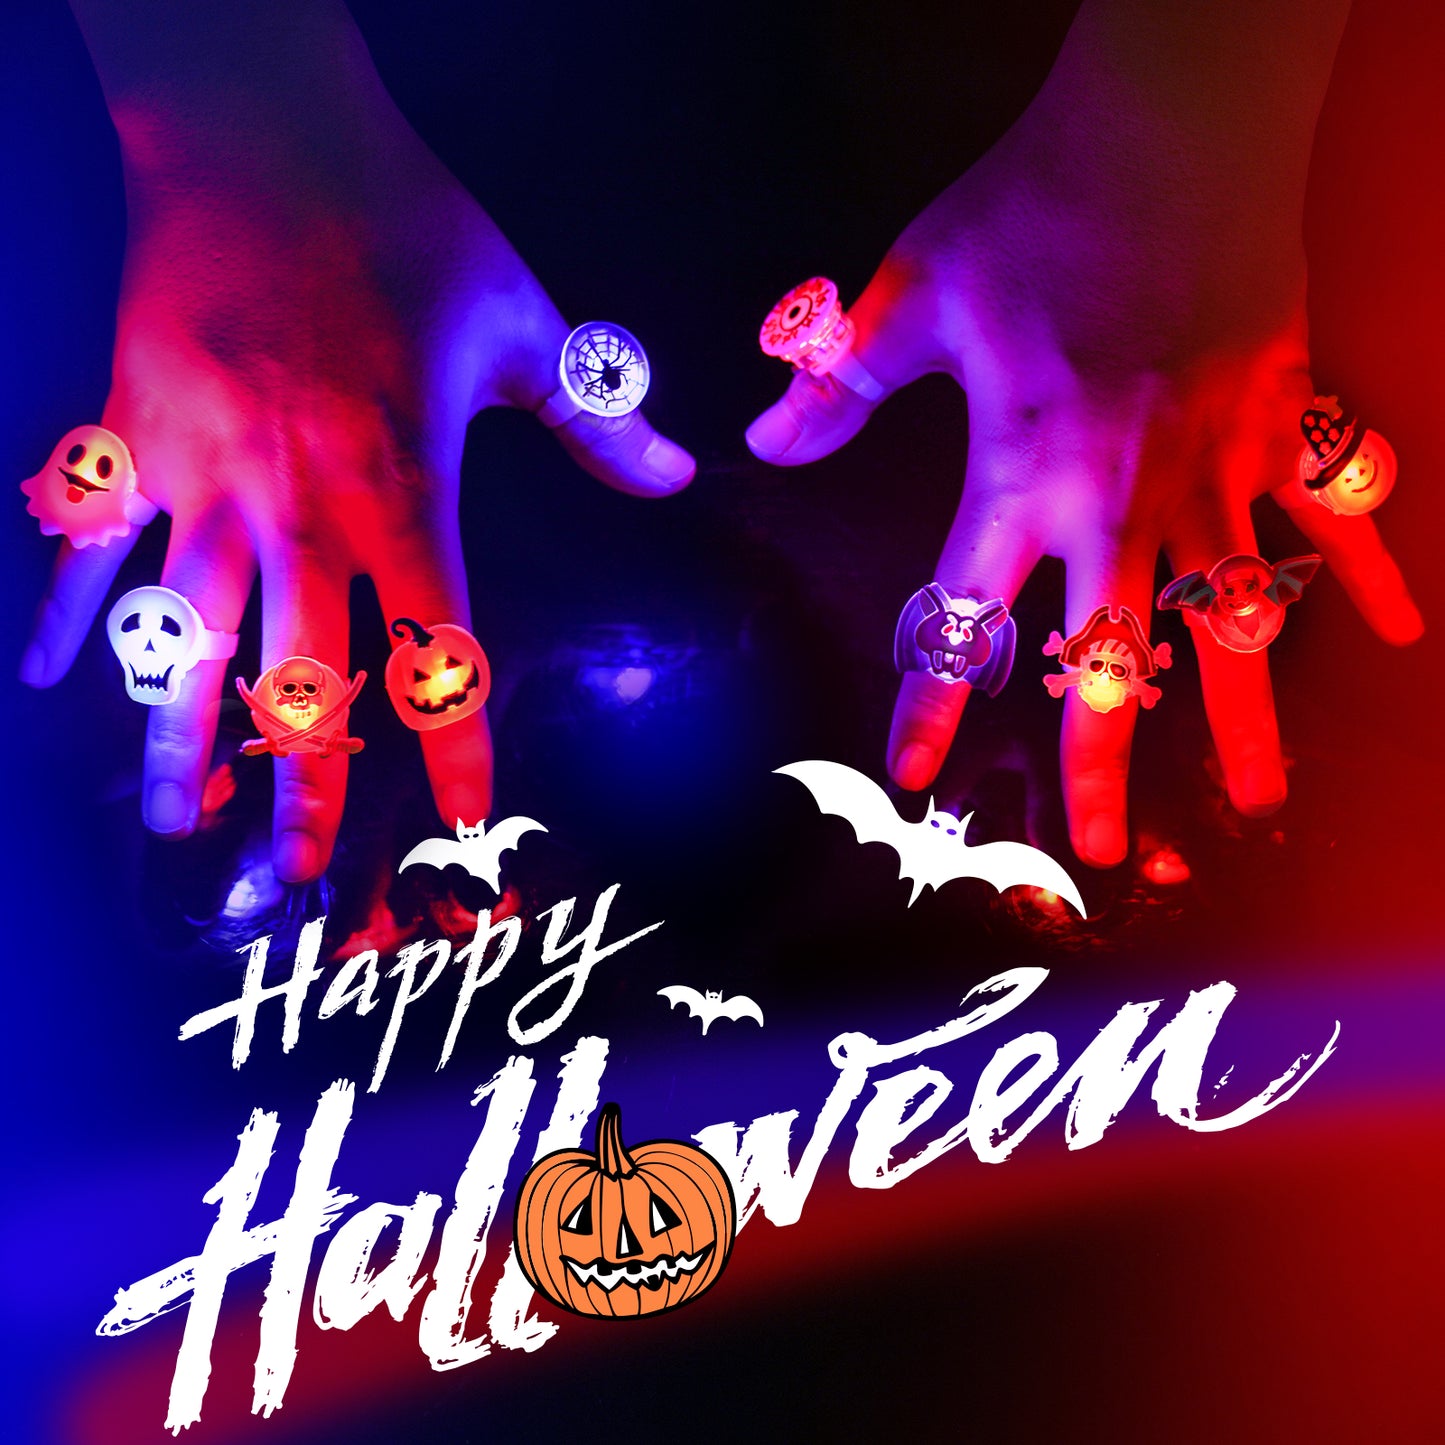 Halloween LED Light Jelly Ring Toys 50PCS Glow-In-The-Dark Party Favors Flashing